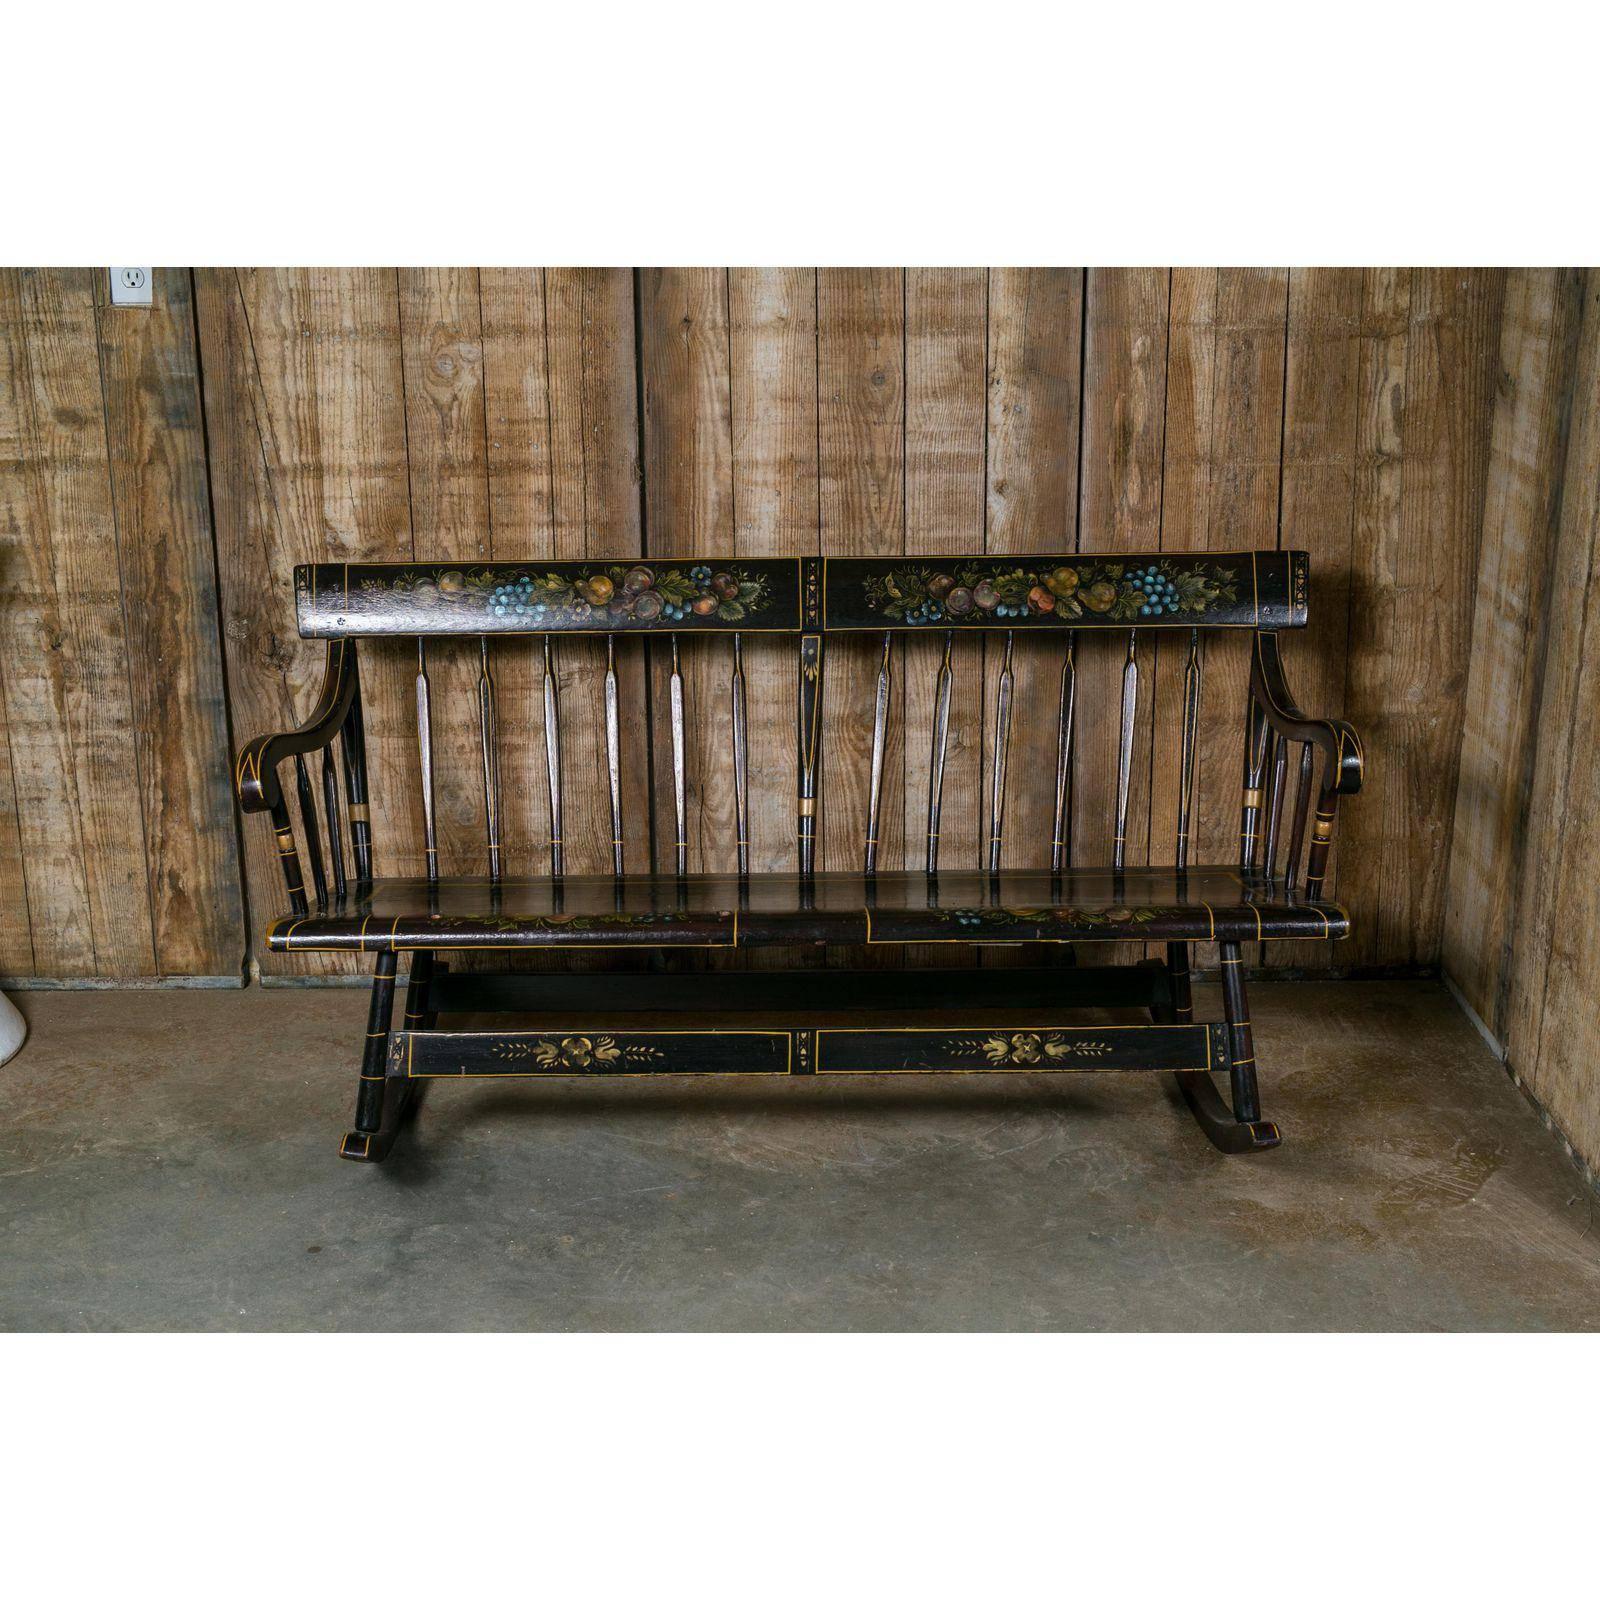 American wooden rocking bench in the Hitchcock style, circa 1890s. Designed to be a cradle rocker combination to cradle and rock your baby to sleep. There is a slat that can be raised to keep the baby in place. The painting was added in the 20th